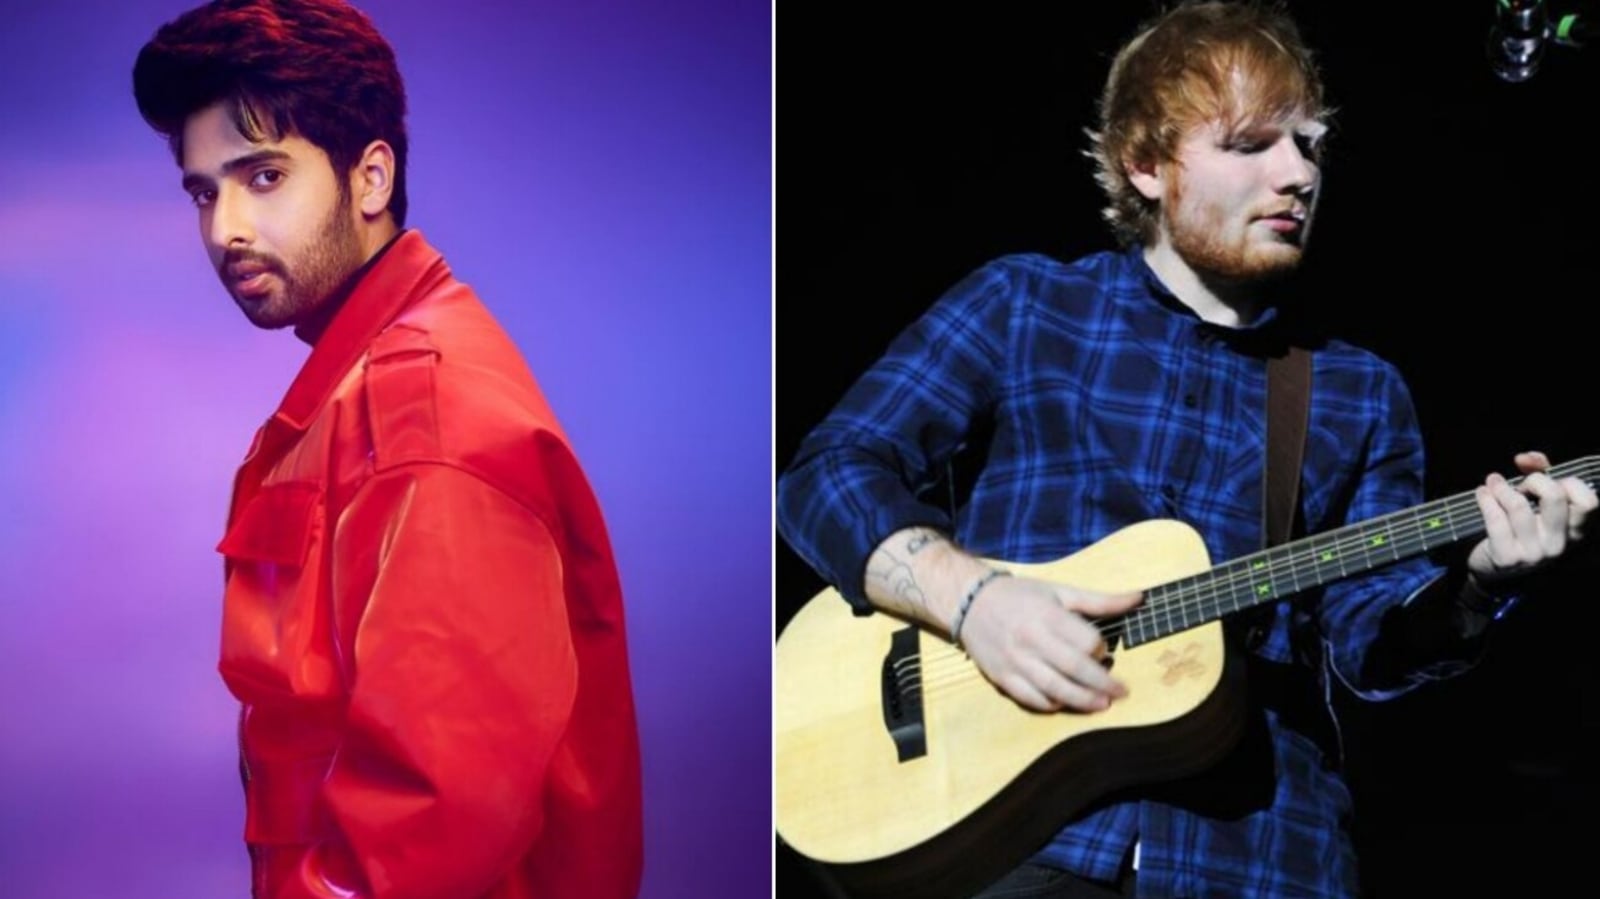 Armaan Malik collaborates with Ed Sheeran on new song 2Step; Akasa Singh says he’s ‘putting India on the map’